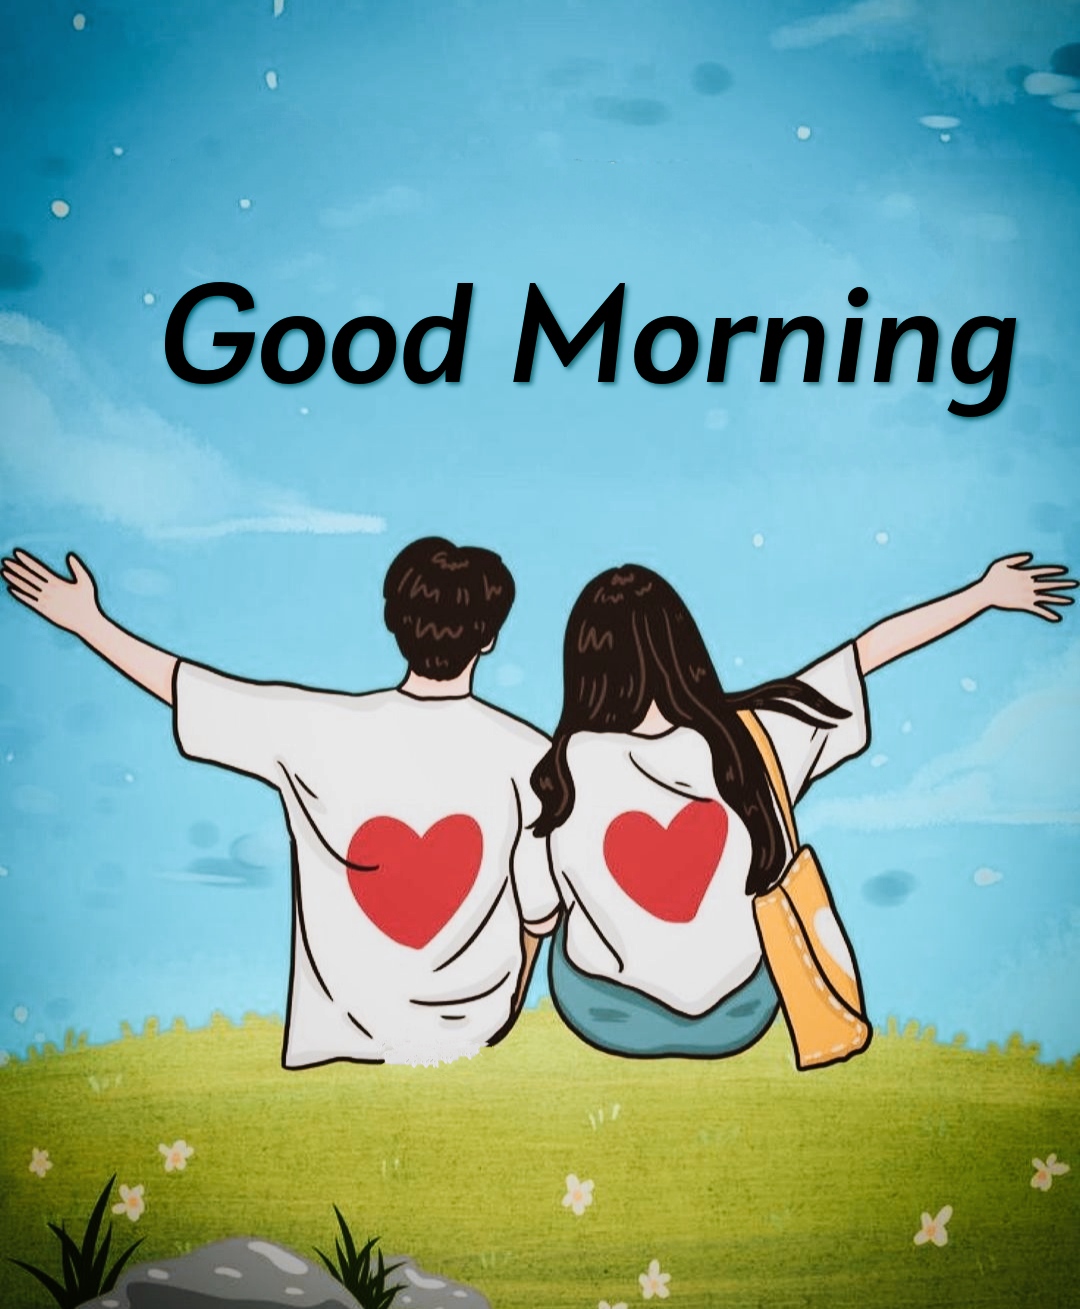 Good Morning Love Images New